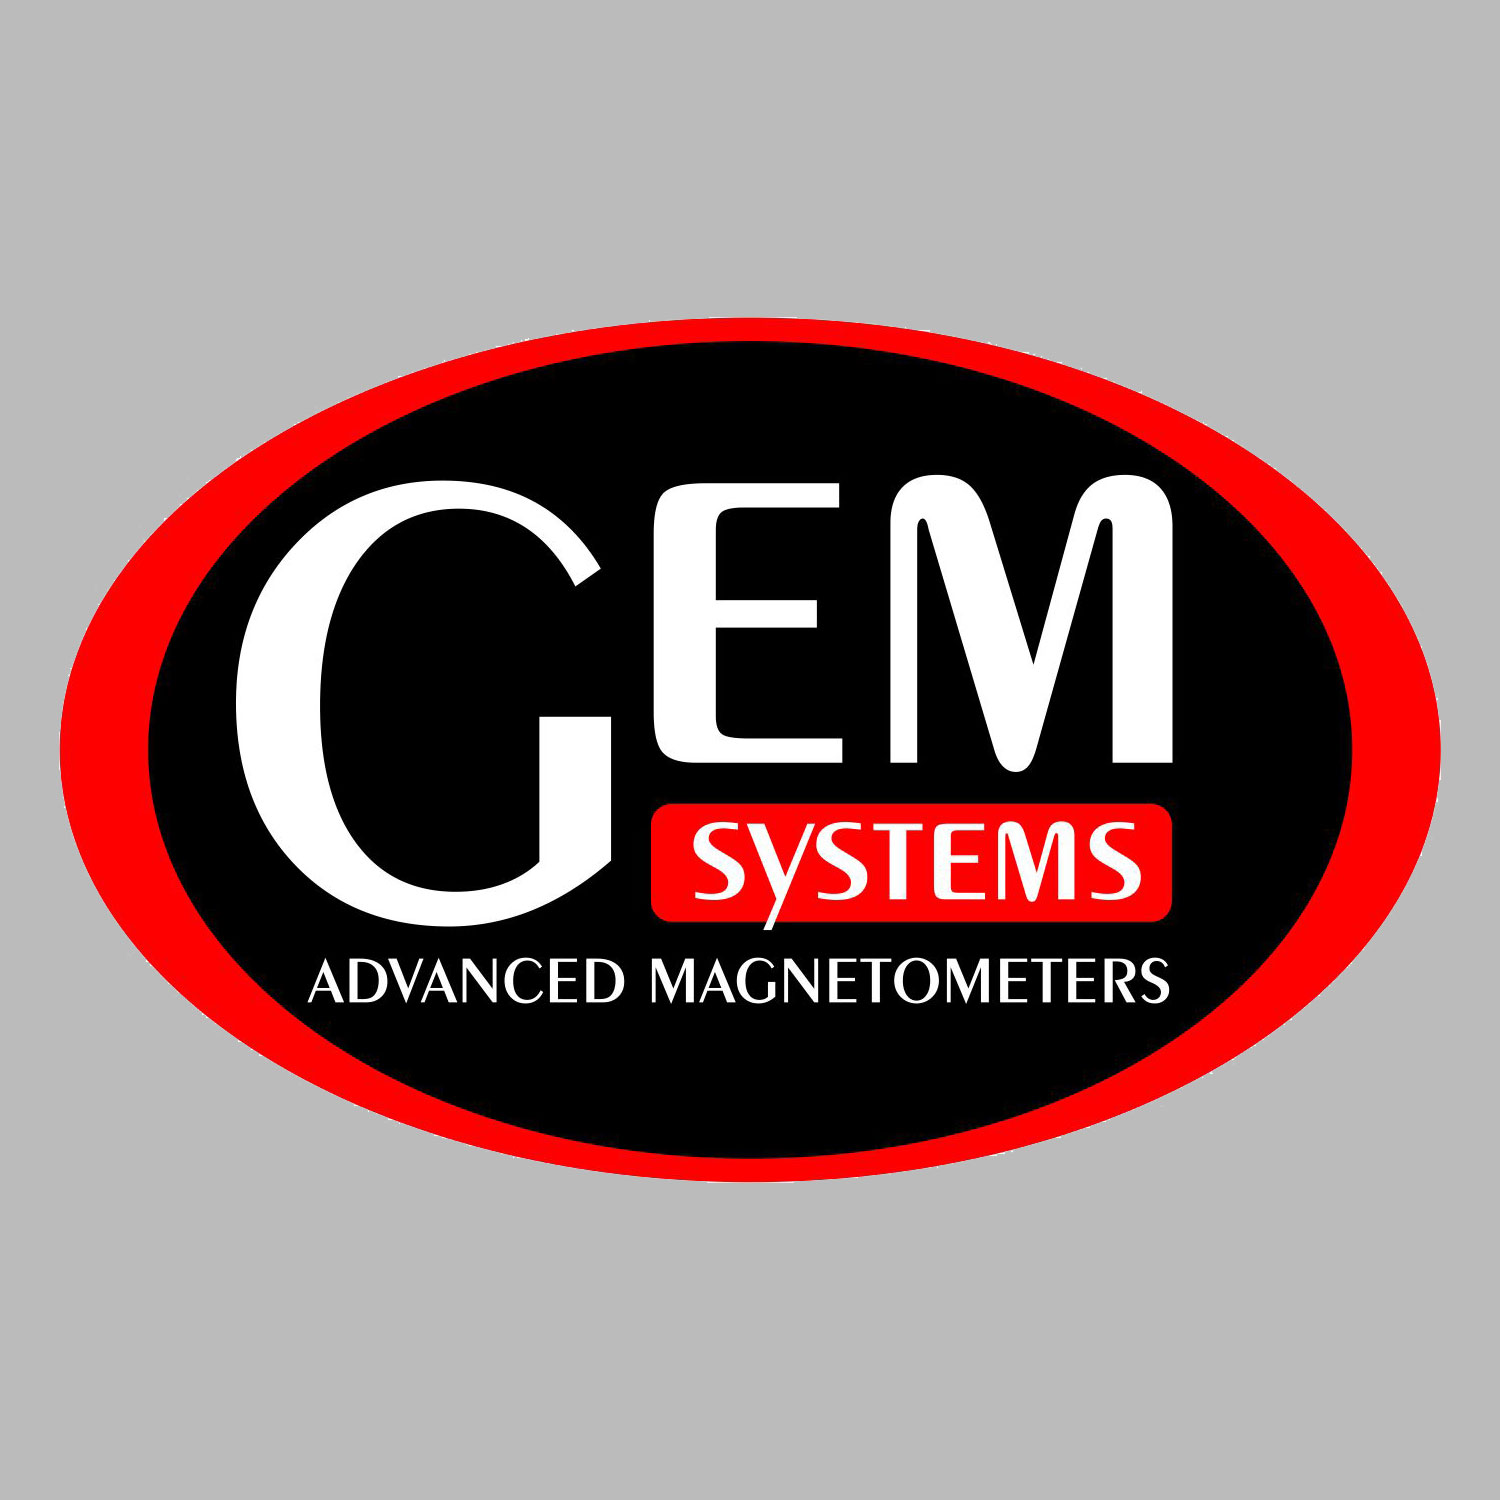 Modern Mag is exclusive GEM Systems Advanced Magnetomer supplier in Australia and New Zealand.